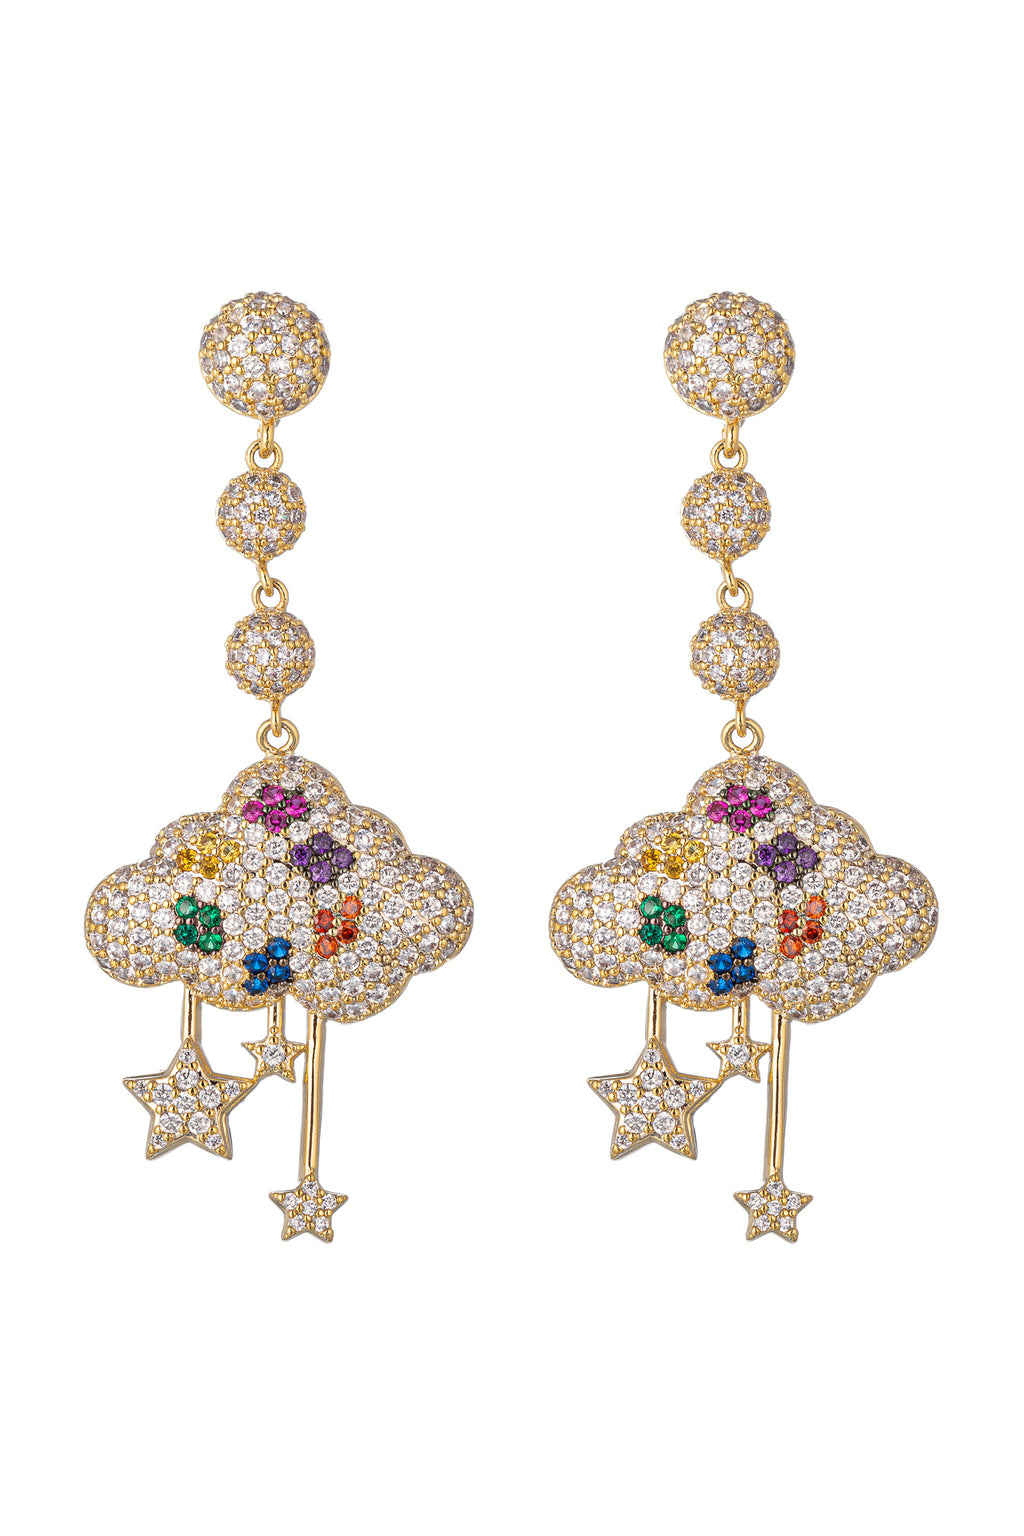 Gold tone brass rain cloud drop earrings studded with CZ crystals. 